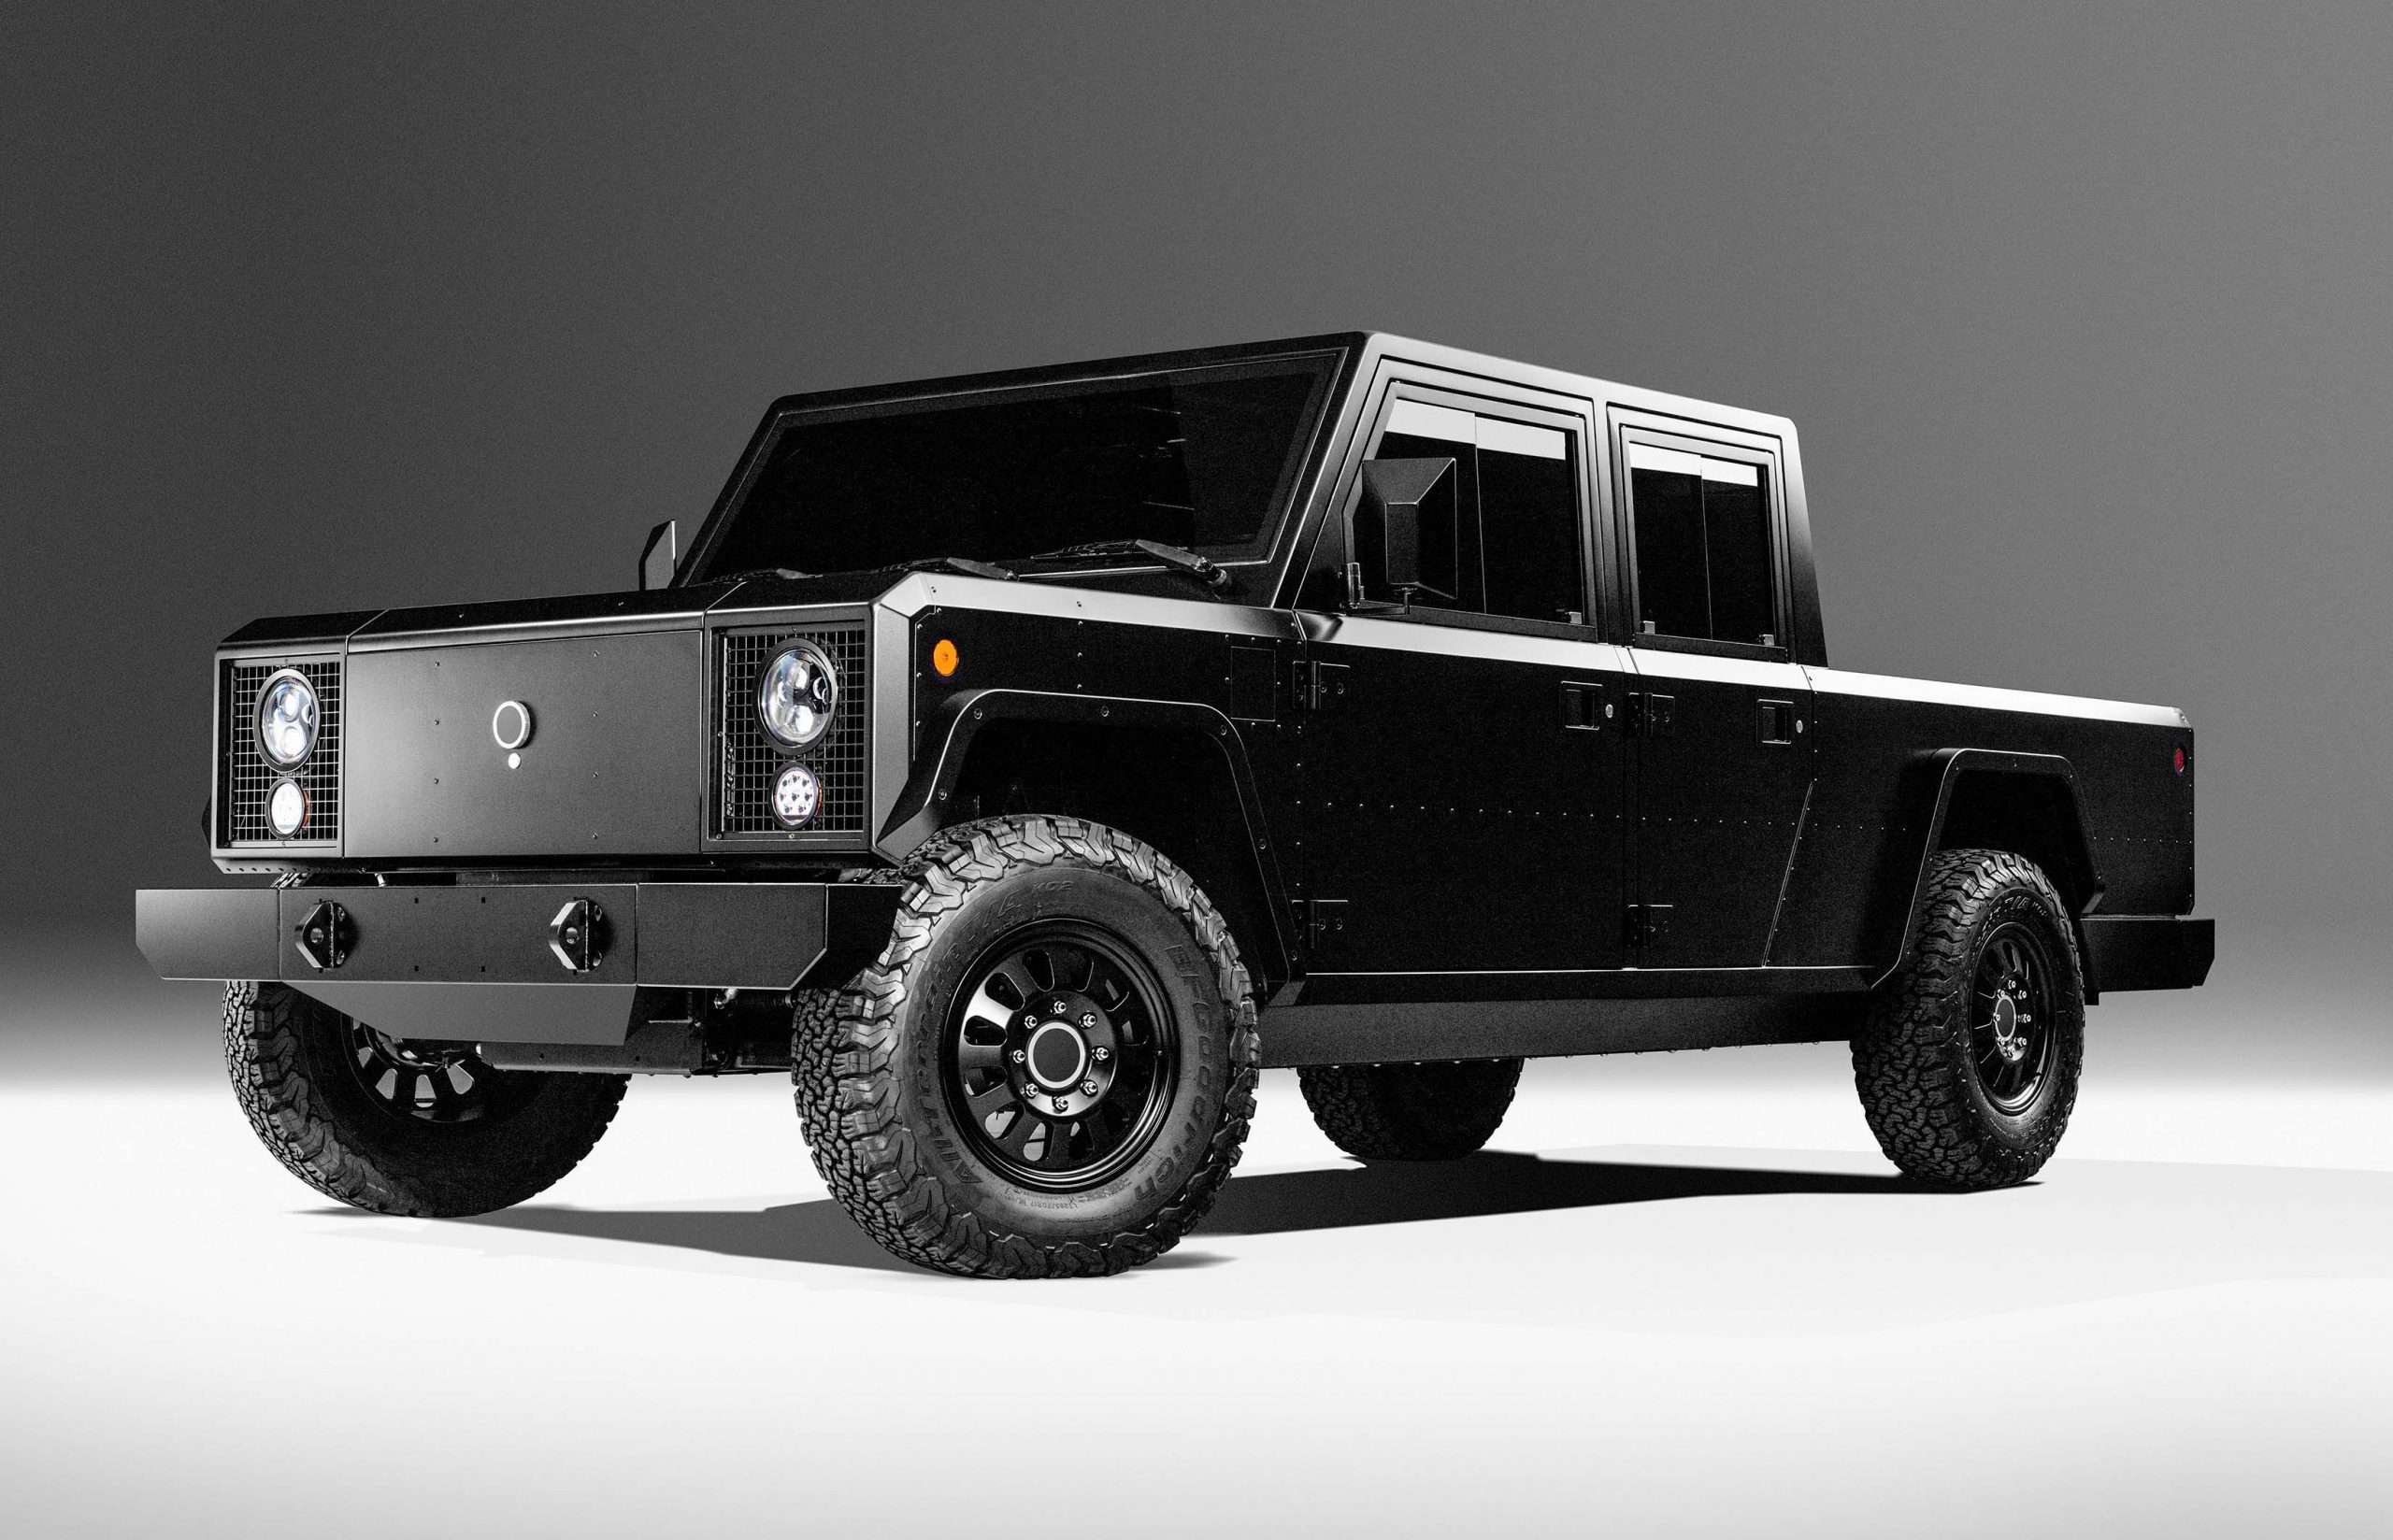 Bollinger B1 SUV, B2 pickup revealed, ready for production